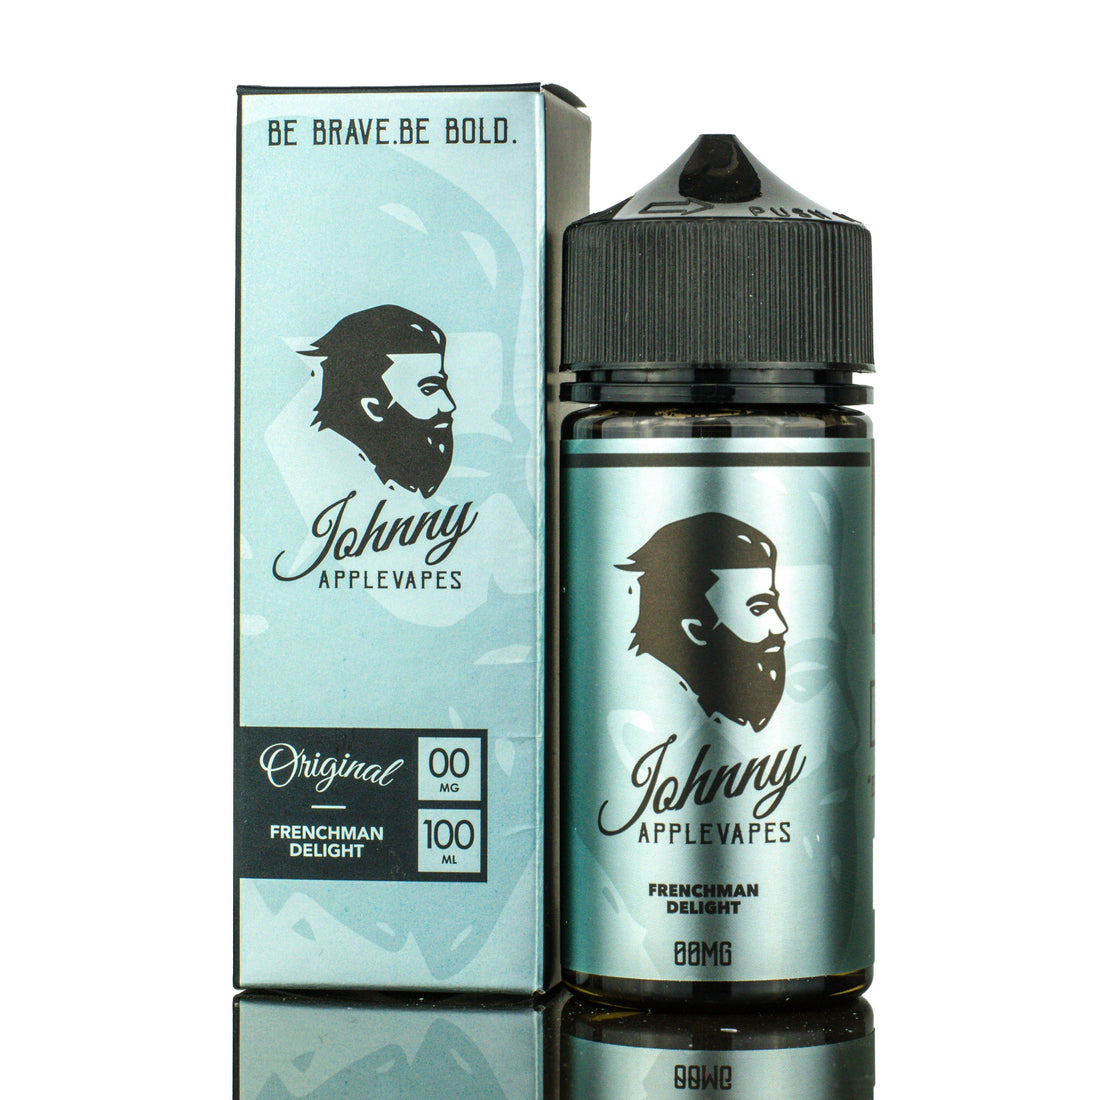 Johnny Applevapes: Frenchman Delight E-Liquid in Vacaville